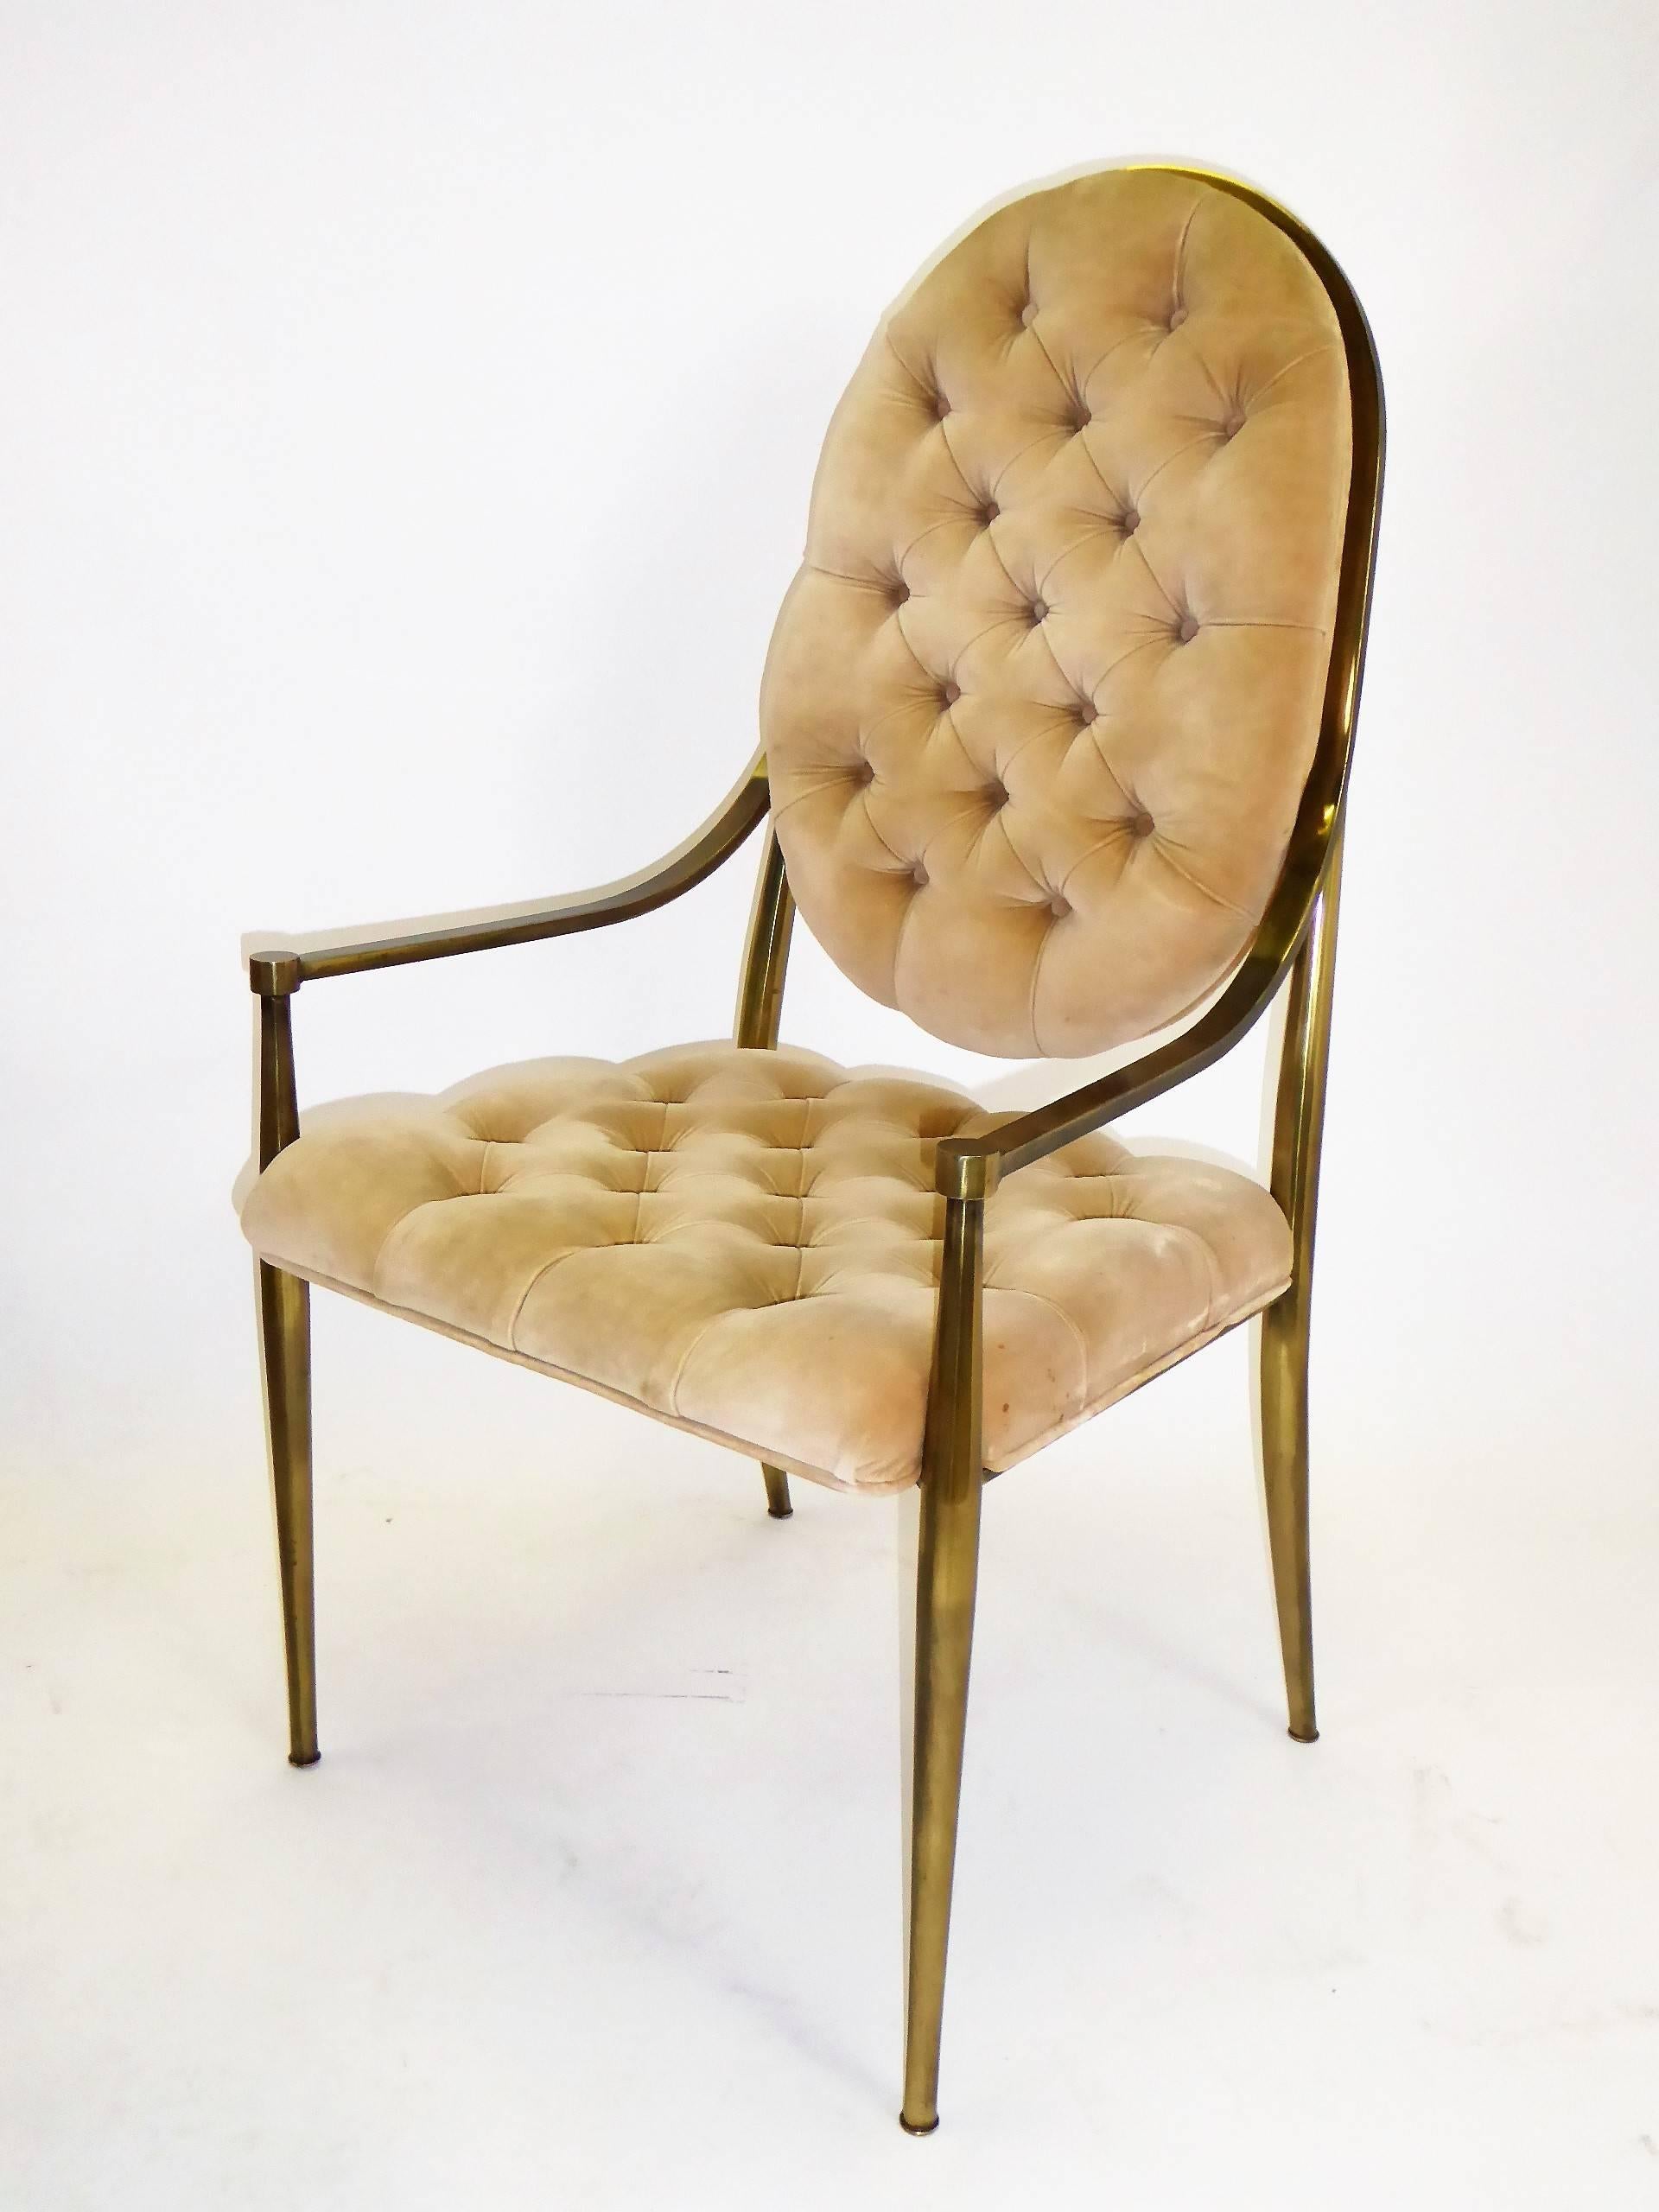 REDUCED FROM $4,800....Six Mastercraft dining chairs with antiqued brass frames and tufted velvet upholstery. Firmly Mid-Century Modern, they are best described as Hollywood Regency with their glamour and nod to the traditional and classical. In